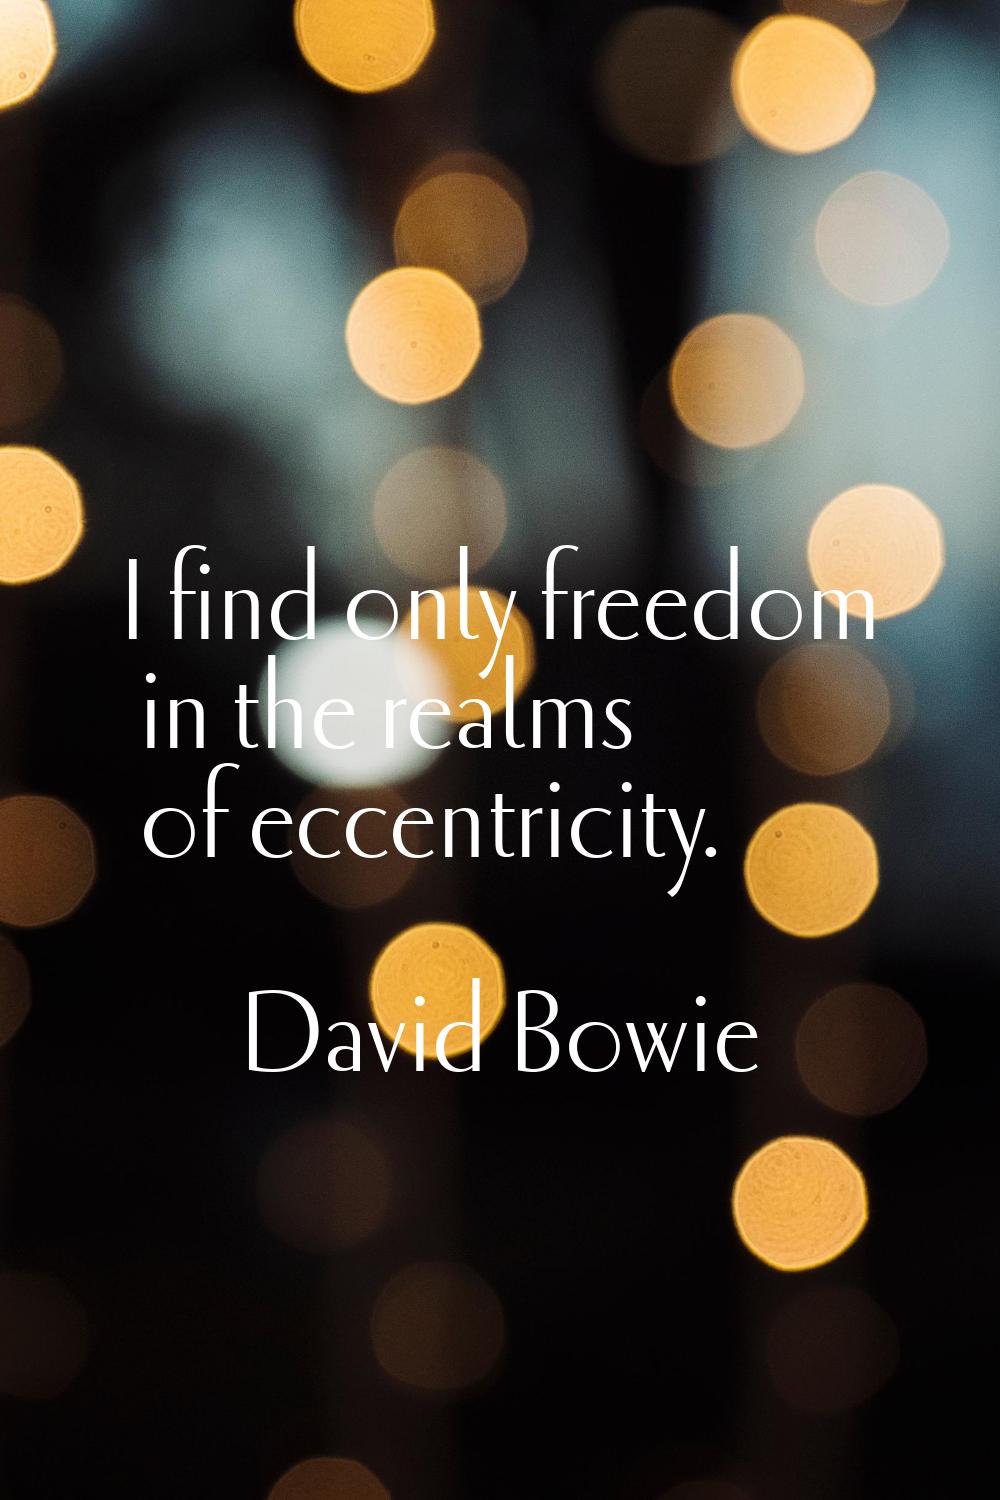 I find only freedom in the realms of eccentricity.